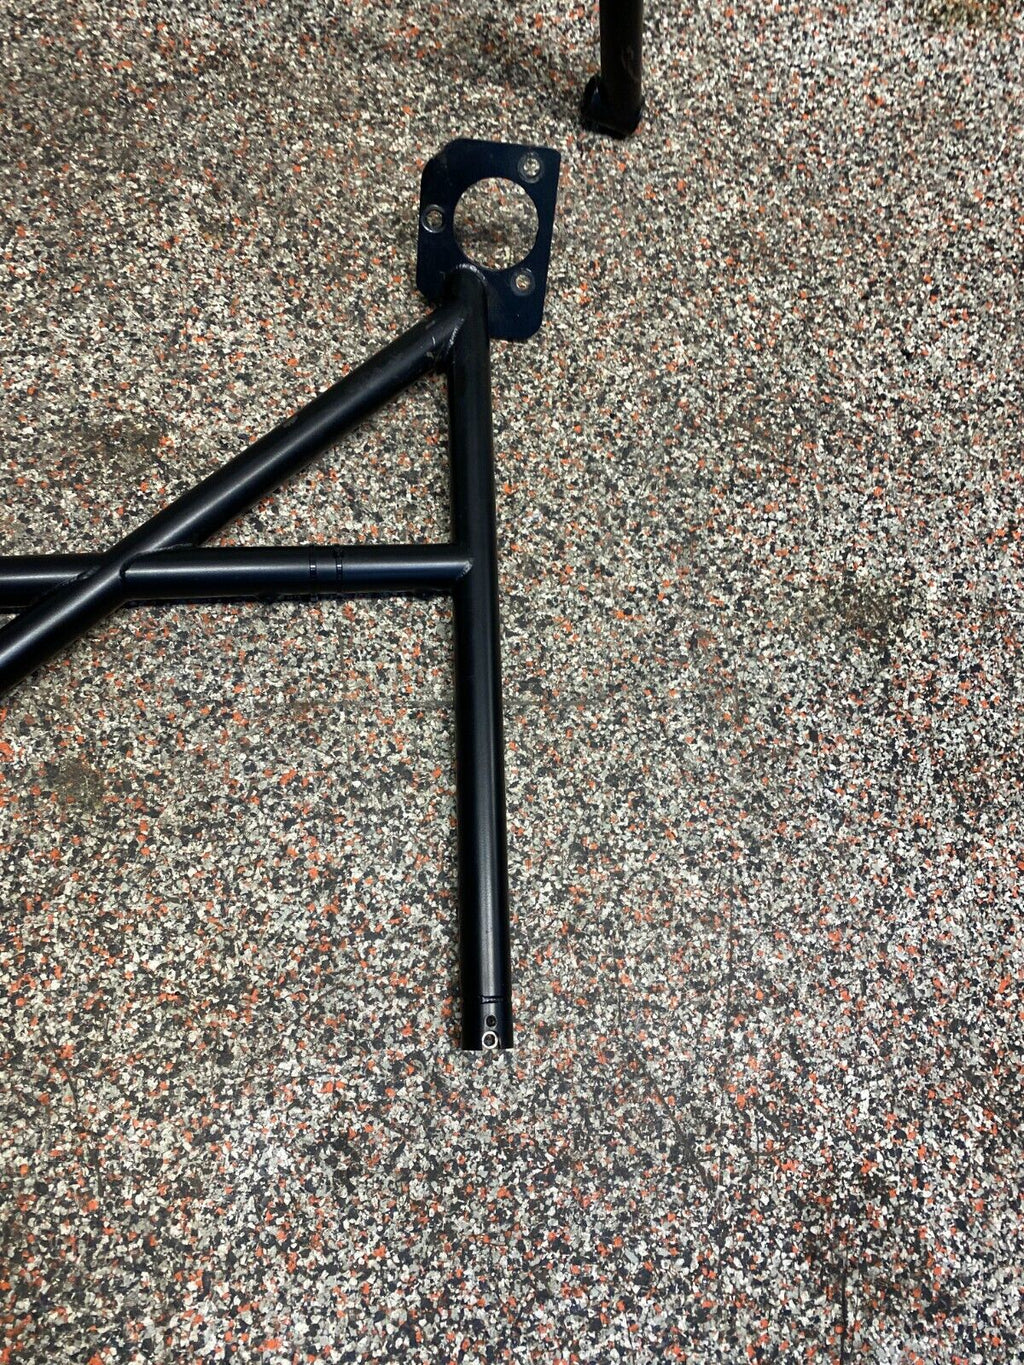 2007 PORSCHE 911 TURBO 997 GMG RSR ROLL BAR CAGE BLACK WITH HARDWARE USED